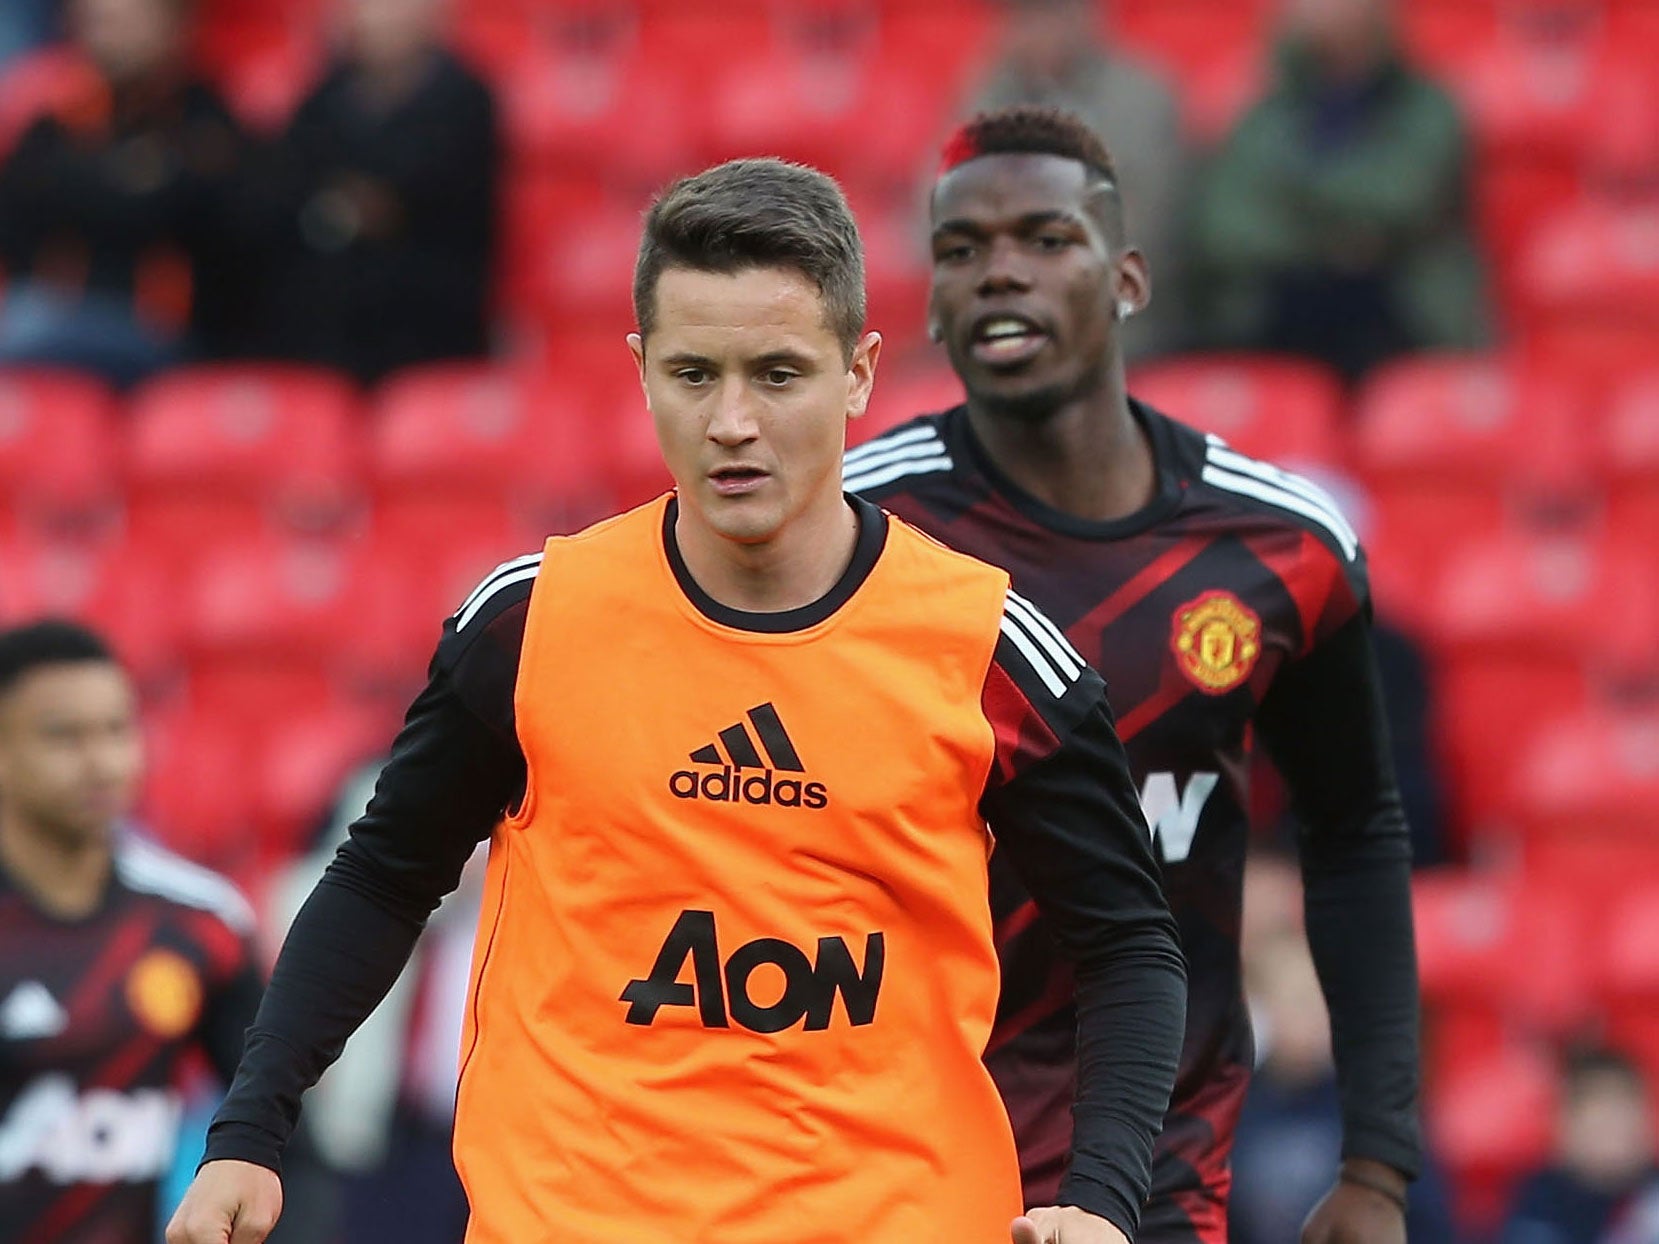 &#13;
Herrera could feature in the Carabao Cup this week &#13;